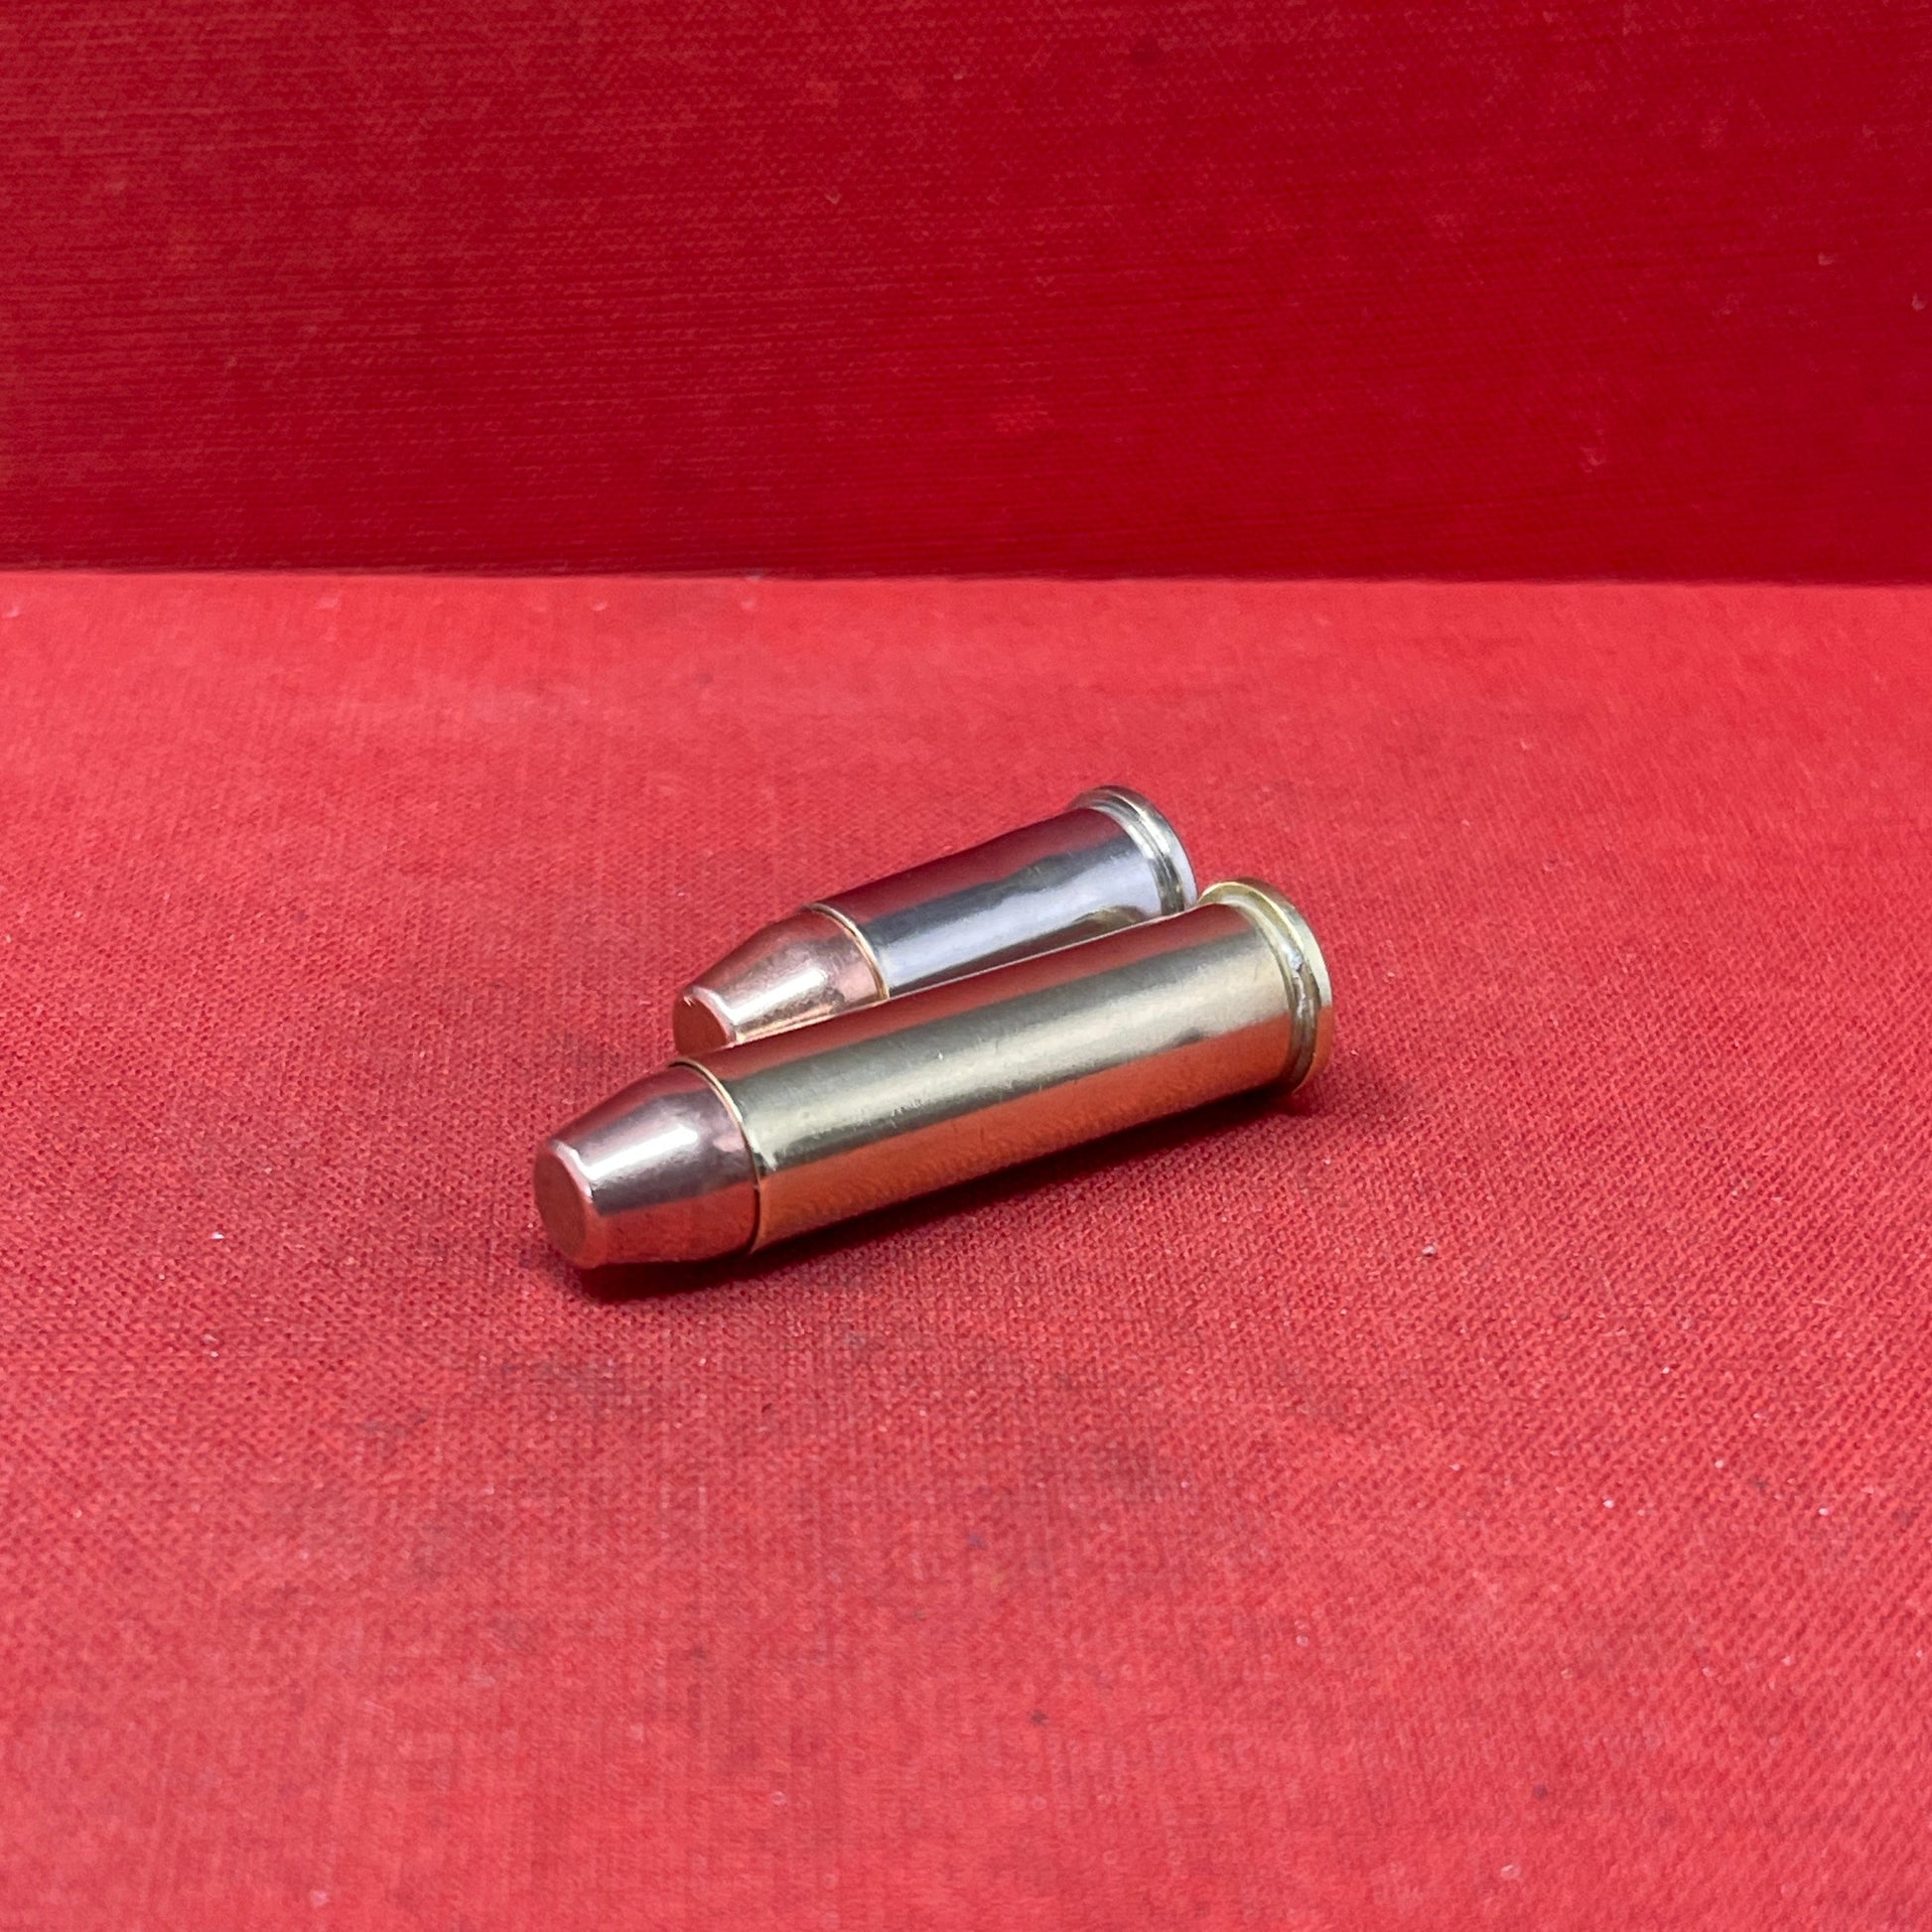 The inert .38 Special bullet typically consists of a cartridge case, primer pocket, and bullet. However, these components are inert and non-functional. The cartridge case is often made of brass or another material commonly used for live ammunition. The primer pocket may appear to contain a primer, but it is typically sealed or empty. The bullet is usually a solid piece of metal or plastic and does not contain any gunpowder or propellant.